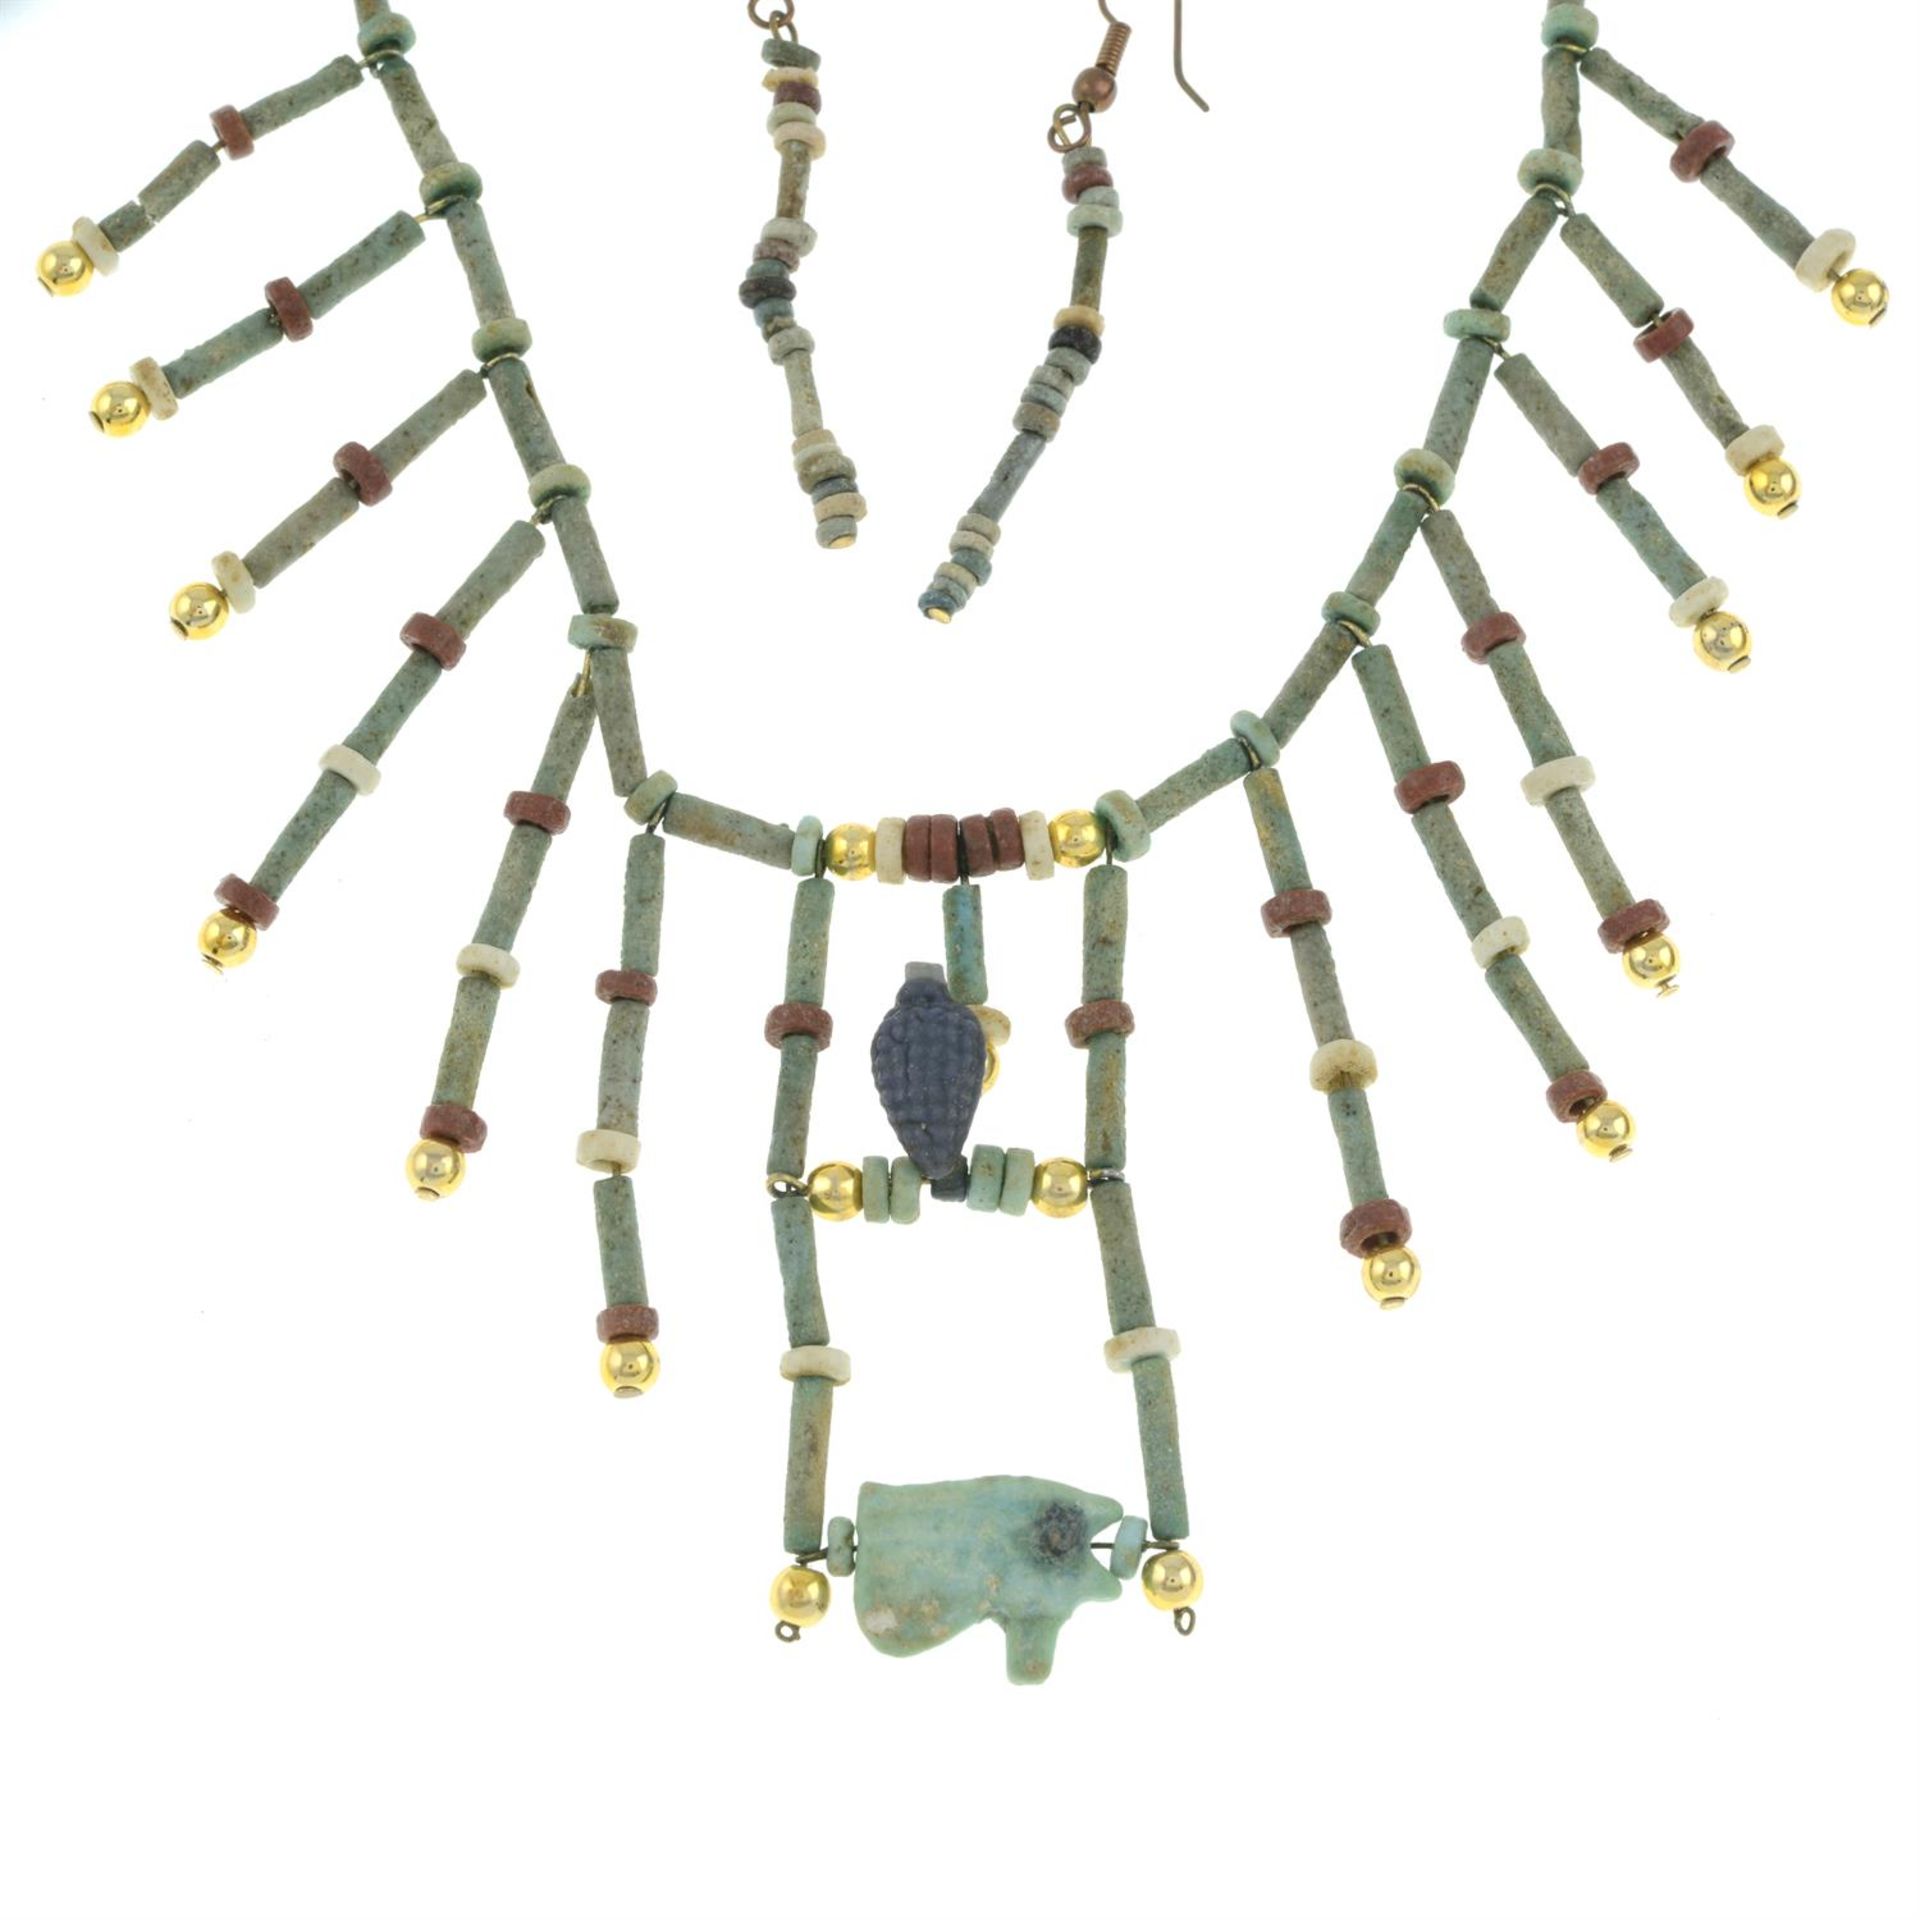 Egyptian faience beads necklace & earrings - Image 2 of 2